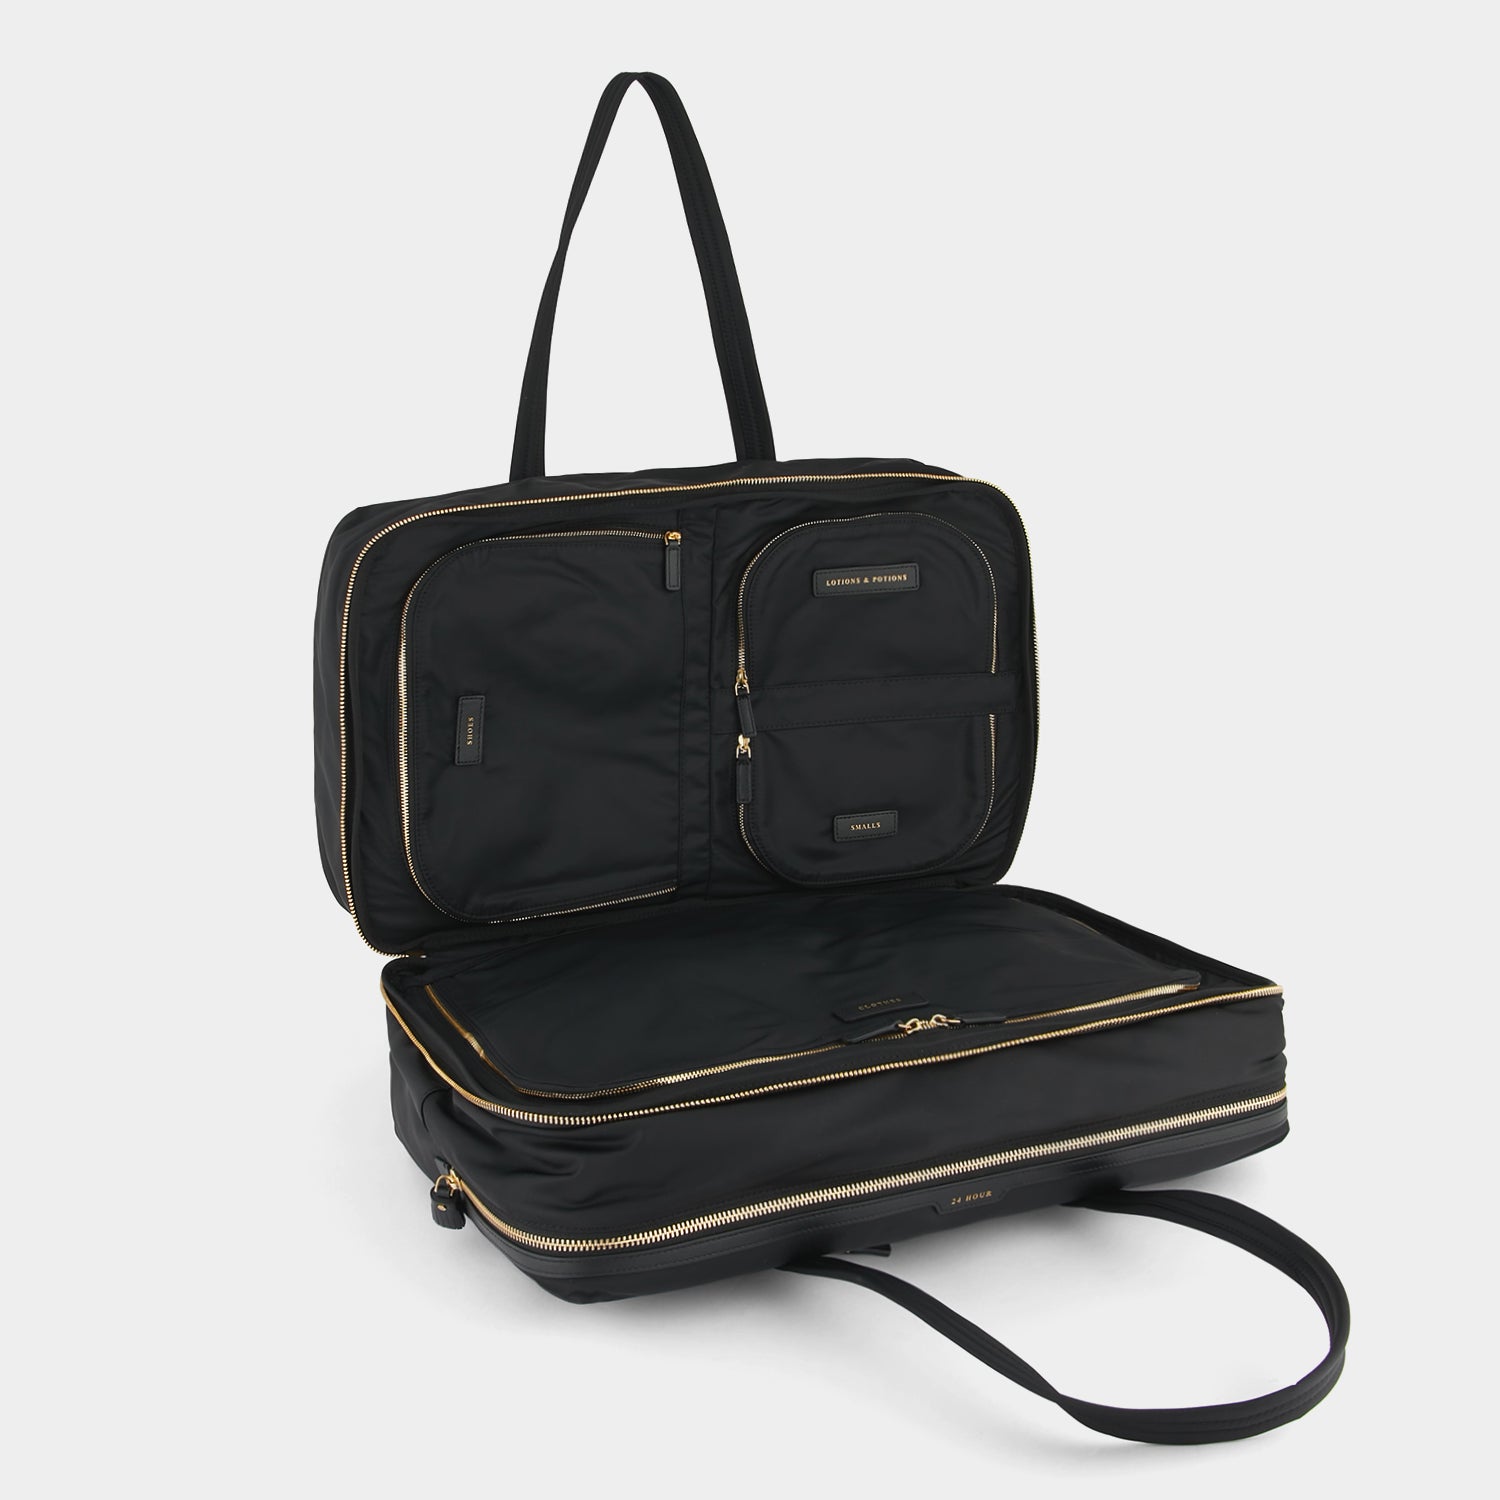 「24 Hour」バッグ -

                  
                    Recycled Nylon with PU in Black -
                  

                  Anya Hindmarch JP
